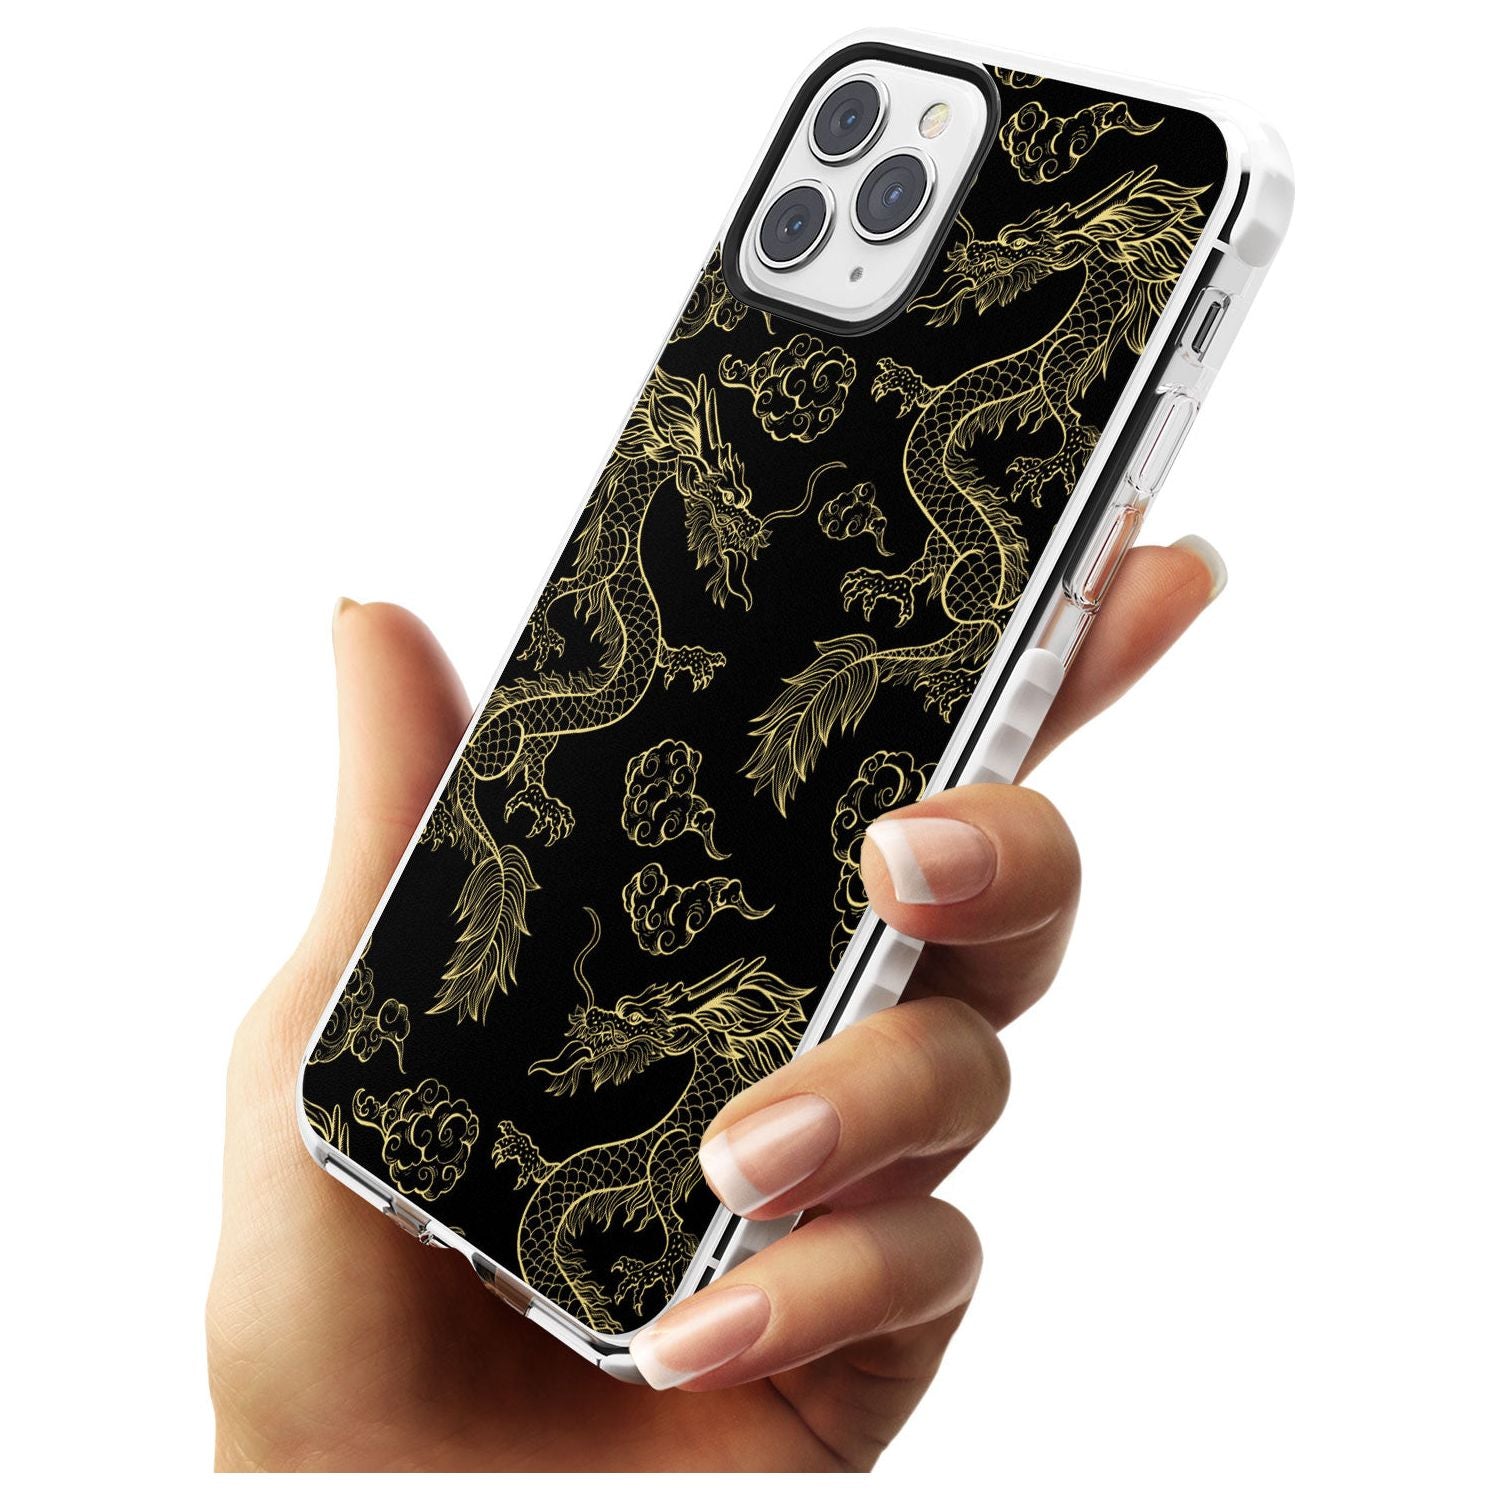 Black and Gold Dragon Pattern Impact Phone Case for iPhone 11 Pro Max